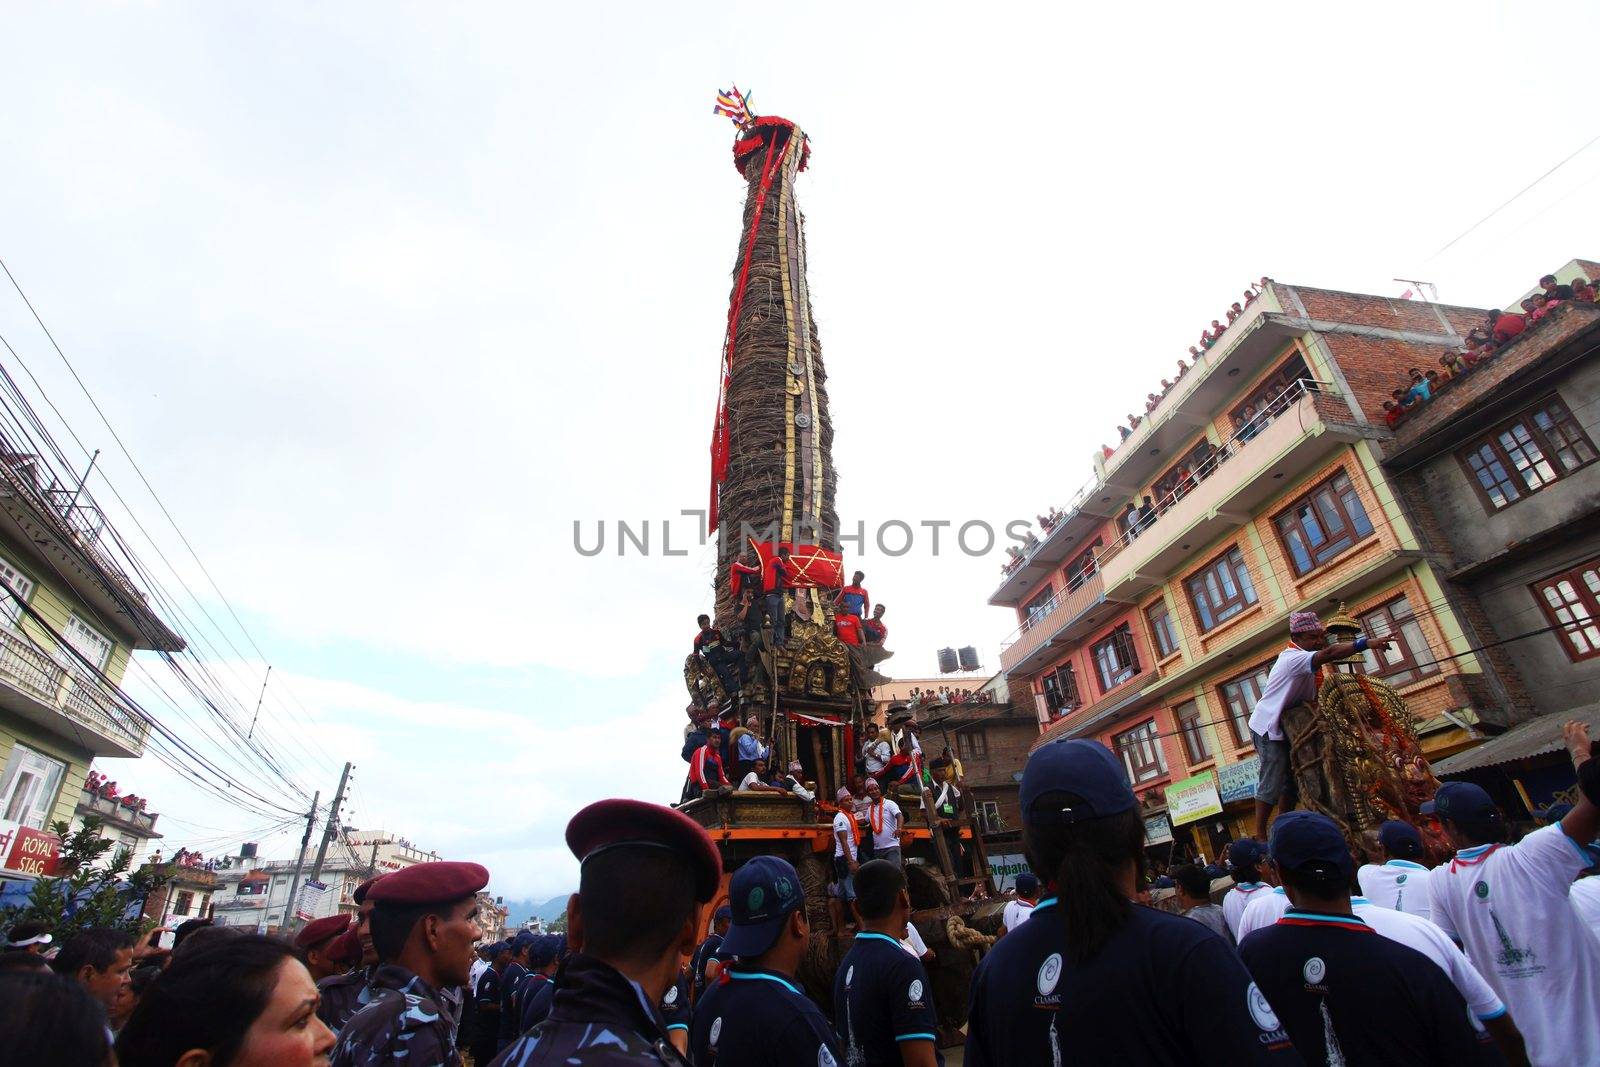 NEPAL, Patan: The restored chariot makes its way through Patan, Nepal as Hindu and Buddhist devotees celebrate the festival of rain god Rato Machindranath on September 22, 2015. The festival takes place each April, but was delayed this year after a devastating earthquake damaged the chariot that devotees pull through the area in the hope of securing a good harvest.